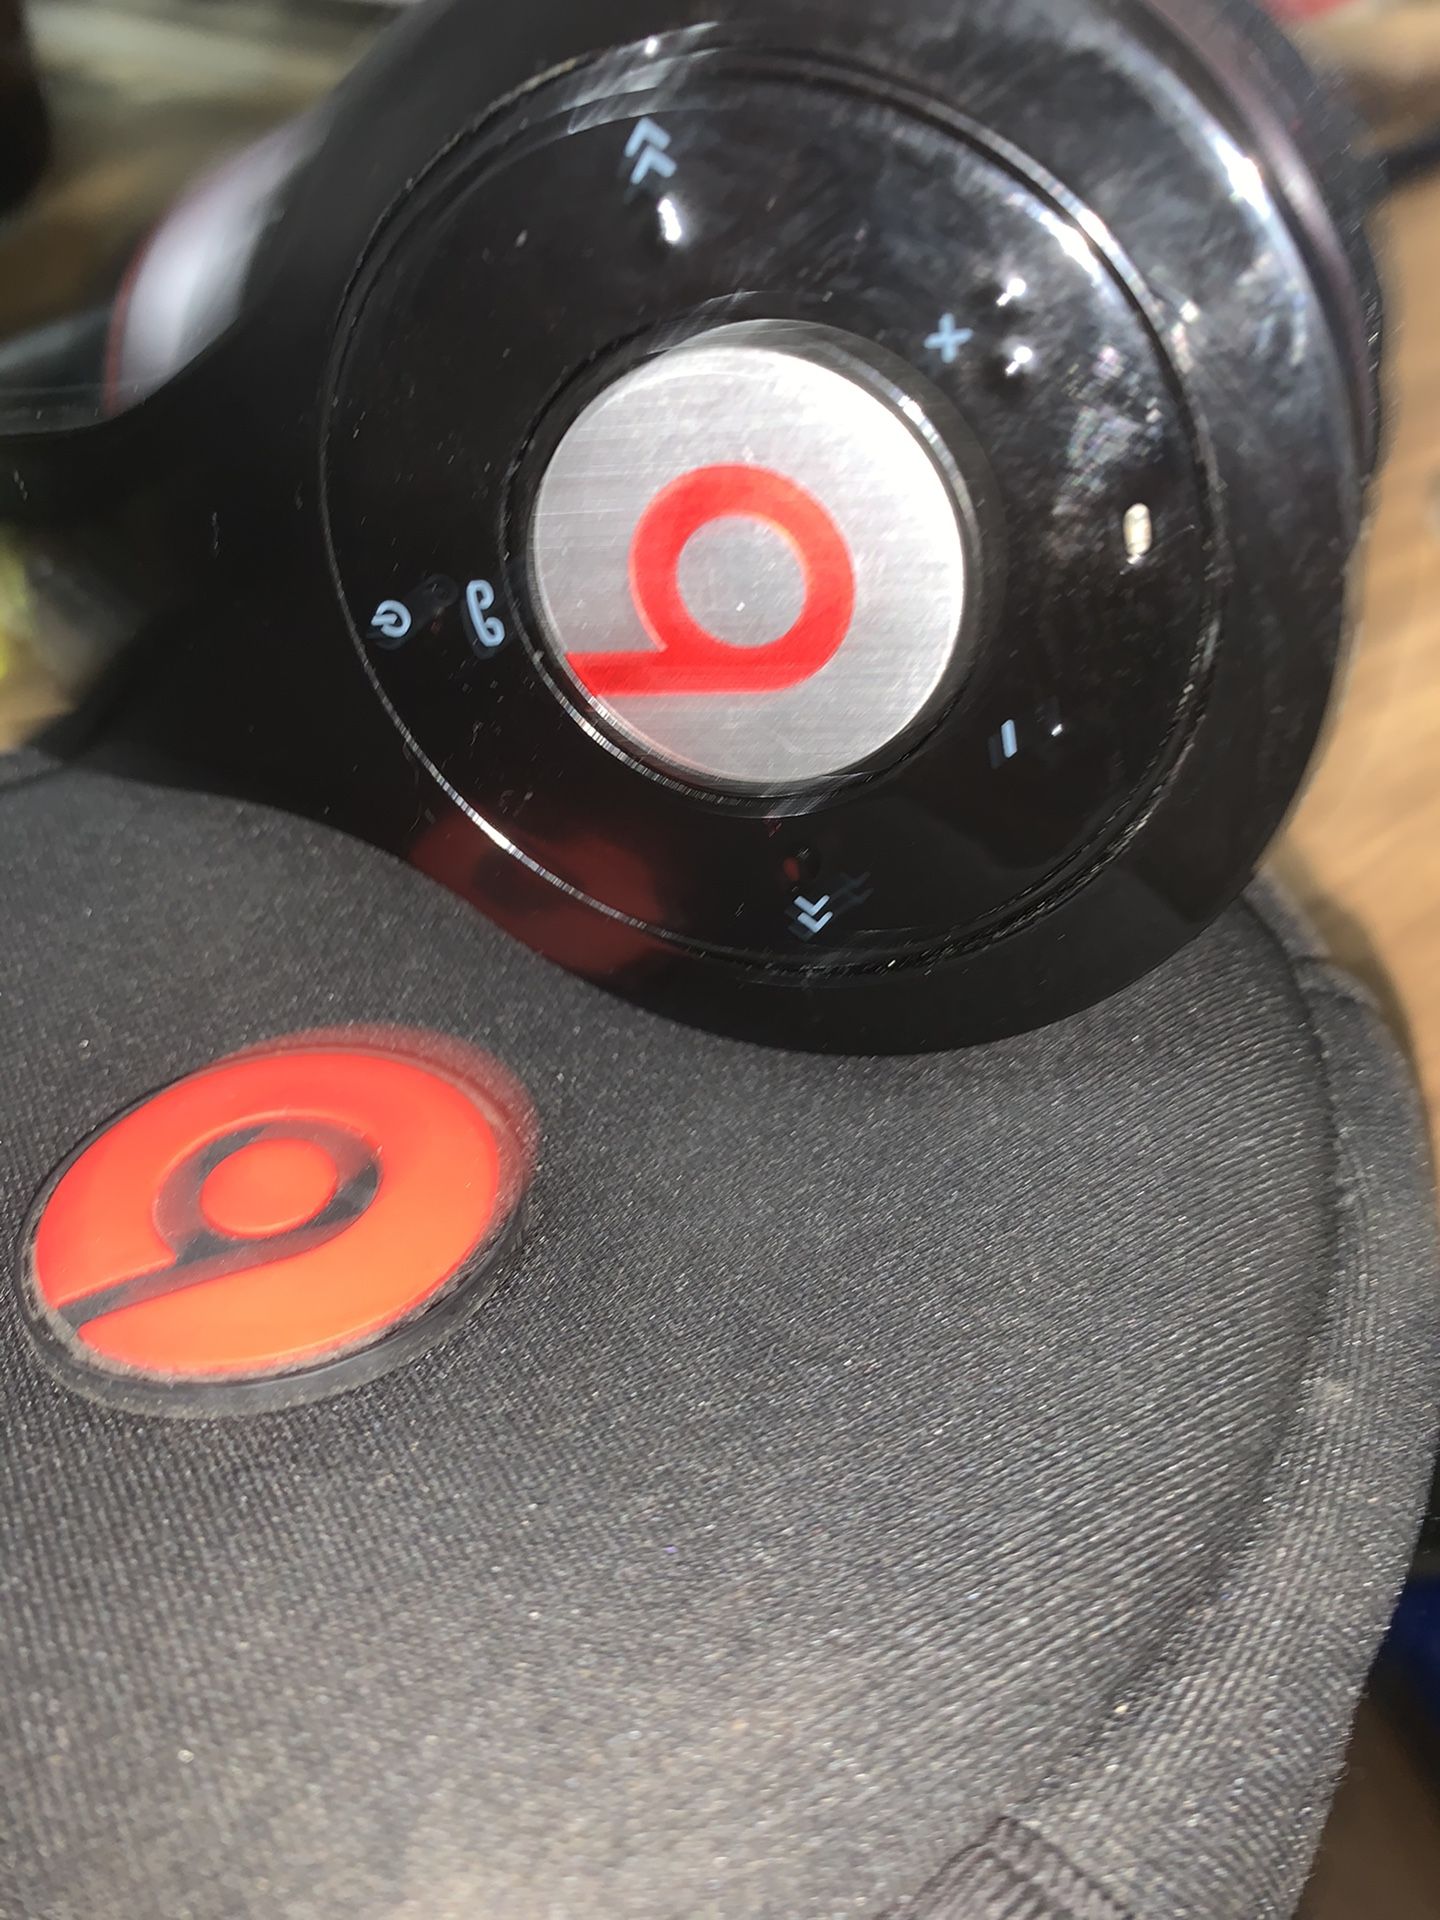 Beats by Dre wireless Bluetooth headphones with case and like new